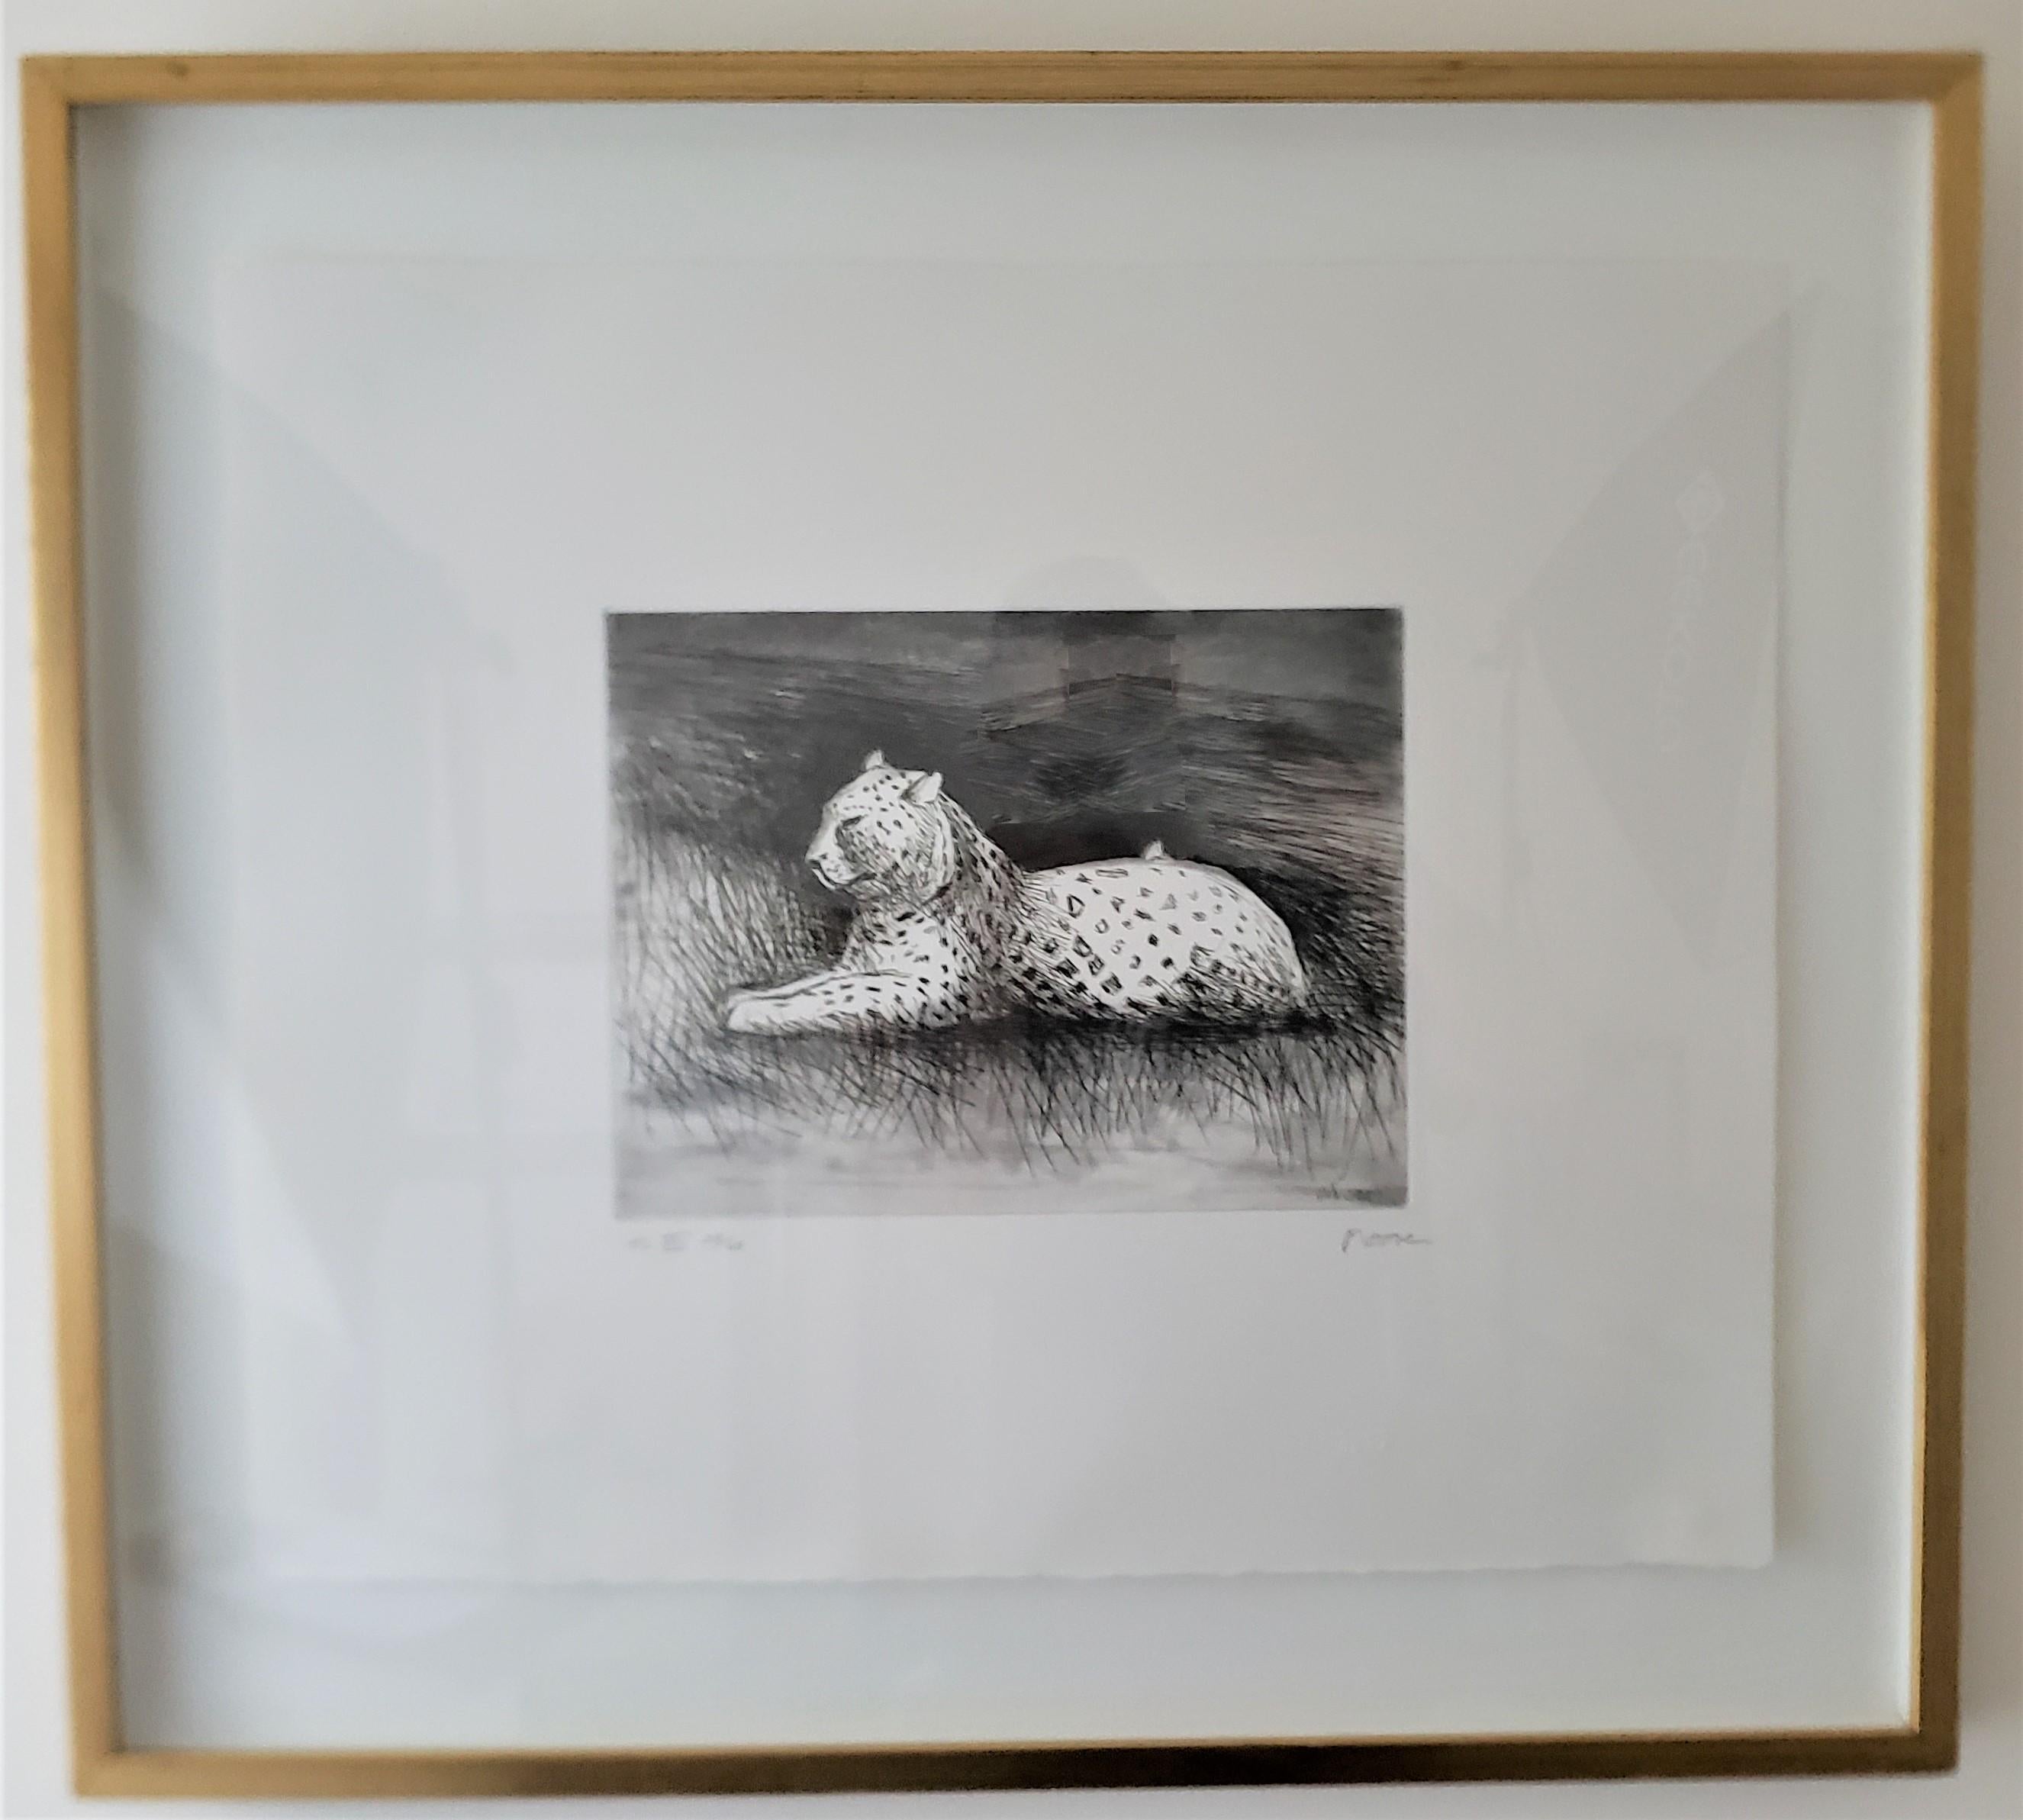 Henry Moore Signed Leopard Framed Lithograph from His Animals in the Zoo Series In Good Condition For Sale In Hamilton, Ontario